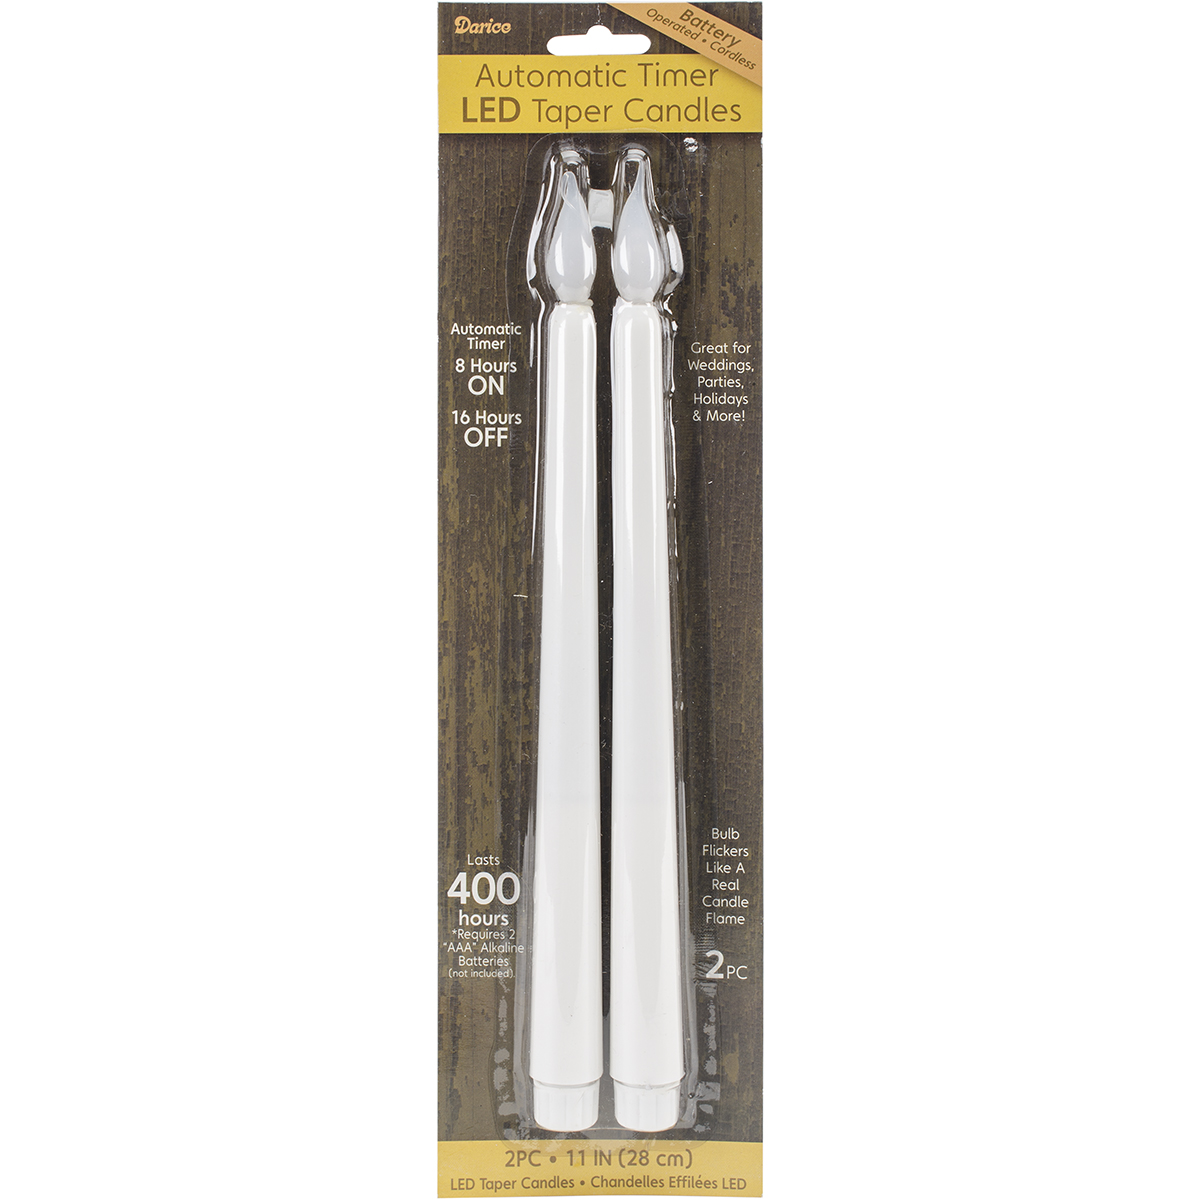 620501 Battery Operated Led Taper Candles With Timer 11 In. -white - 2 Per Pack